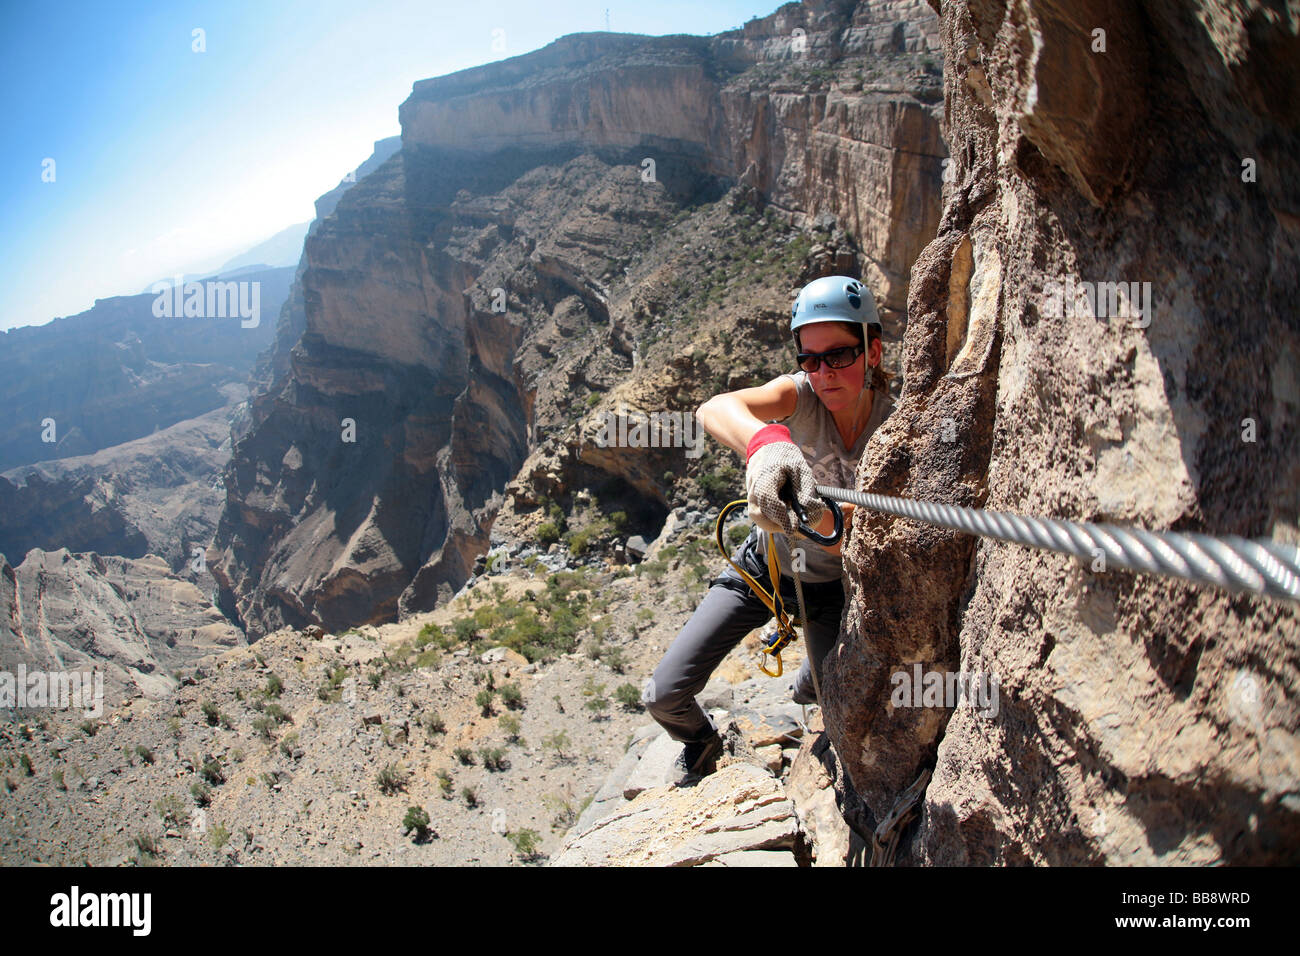 Climbing “Oman's Grand Canyon” via the Ferrata route to the top-plateau of Jebel Shams in Oman Stock Photo